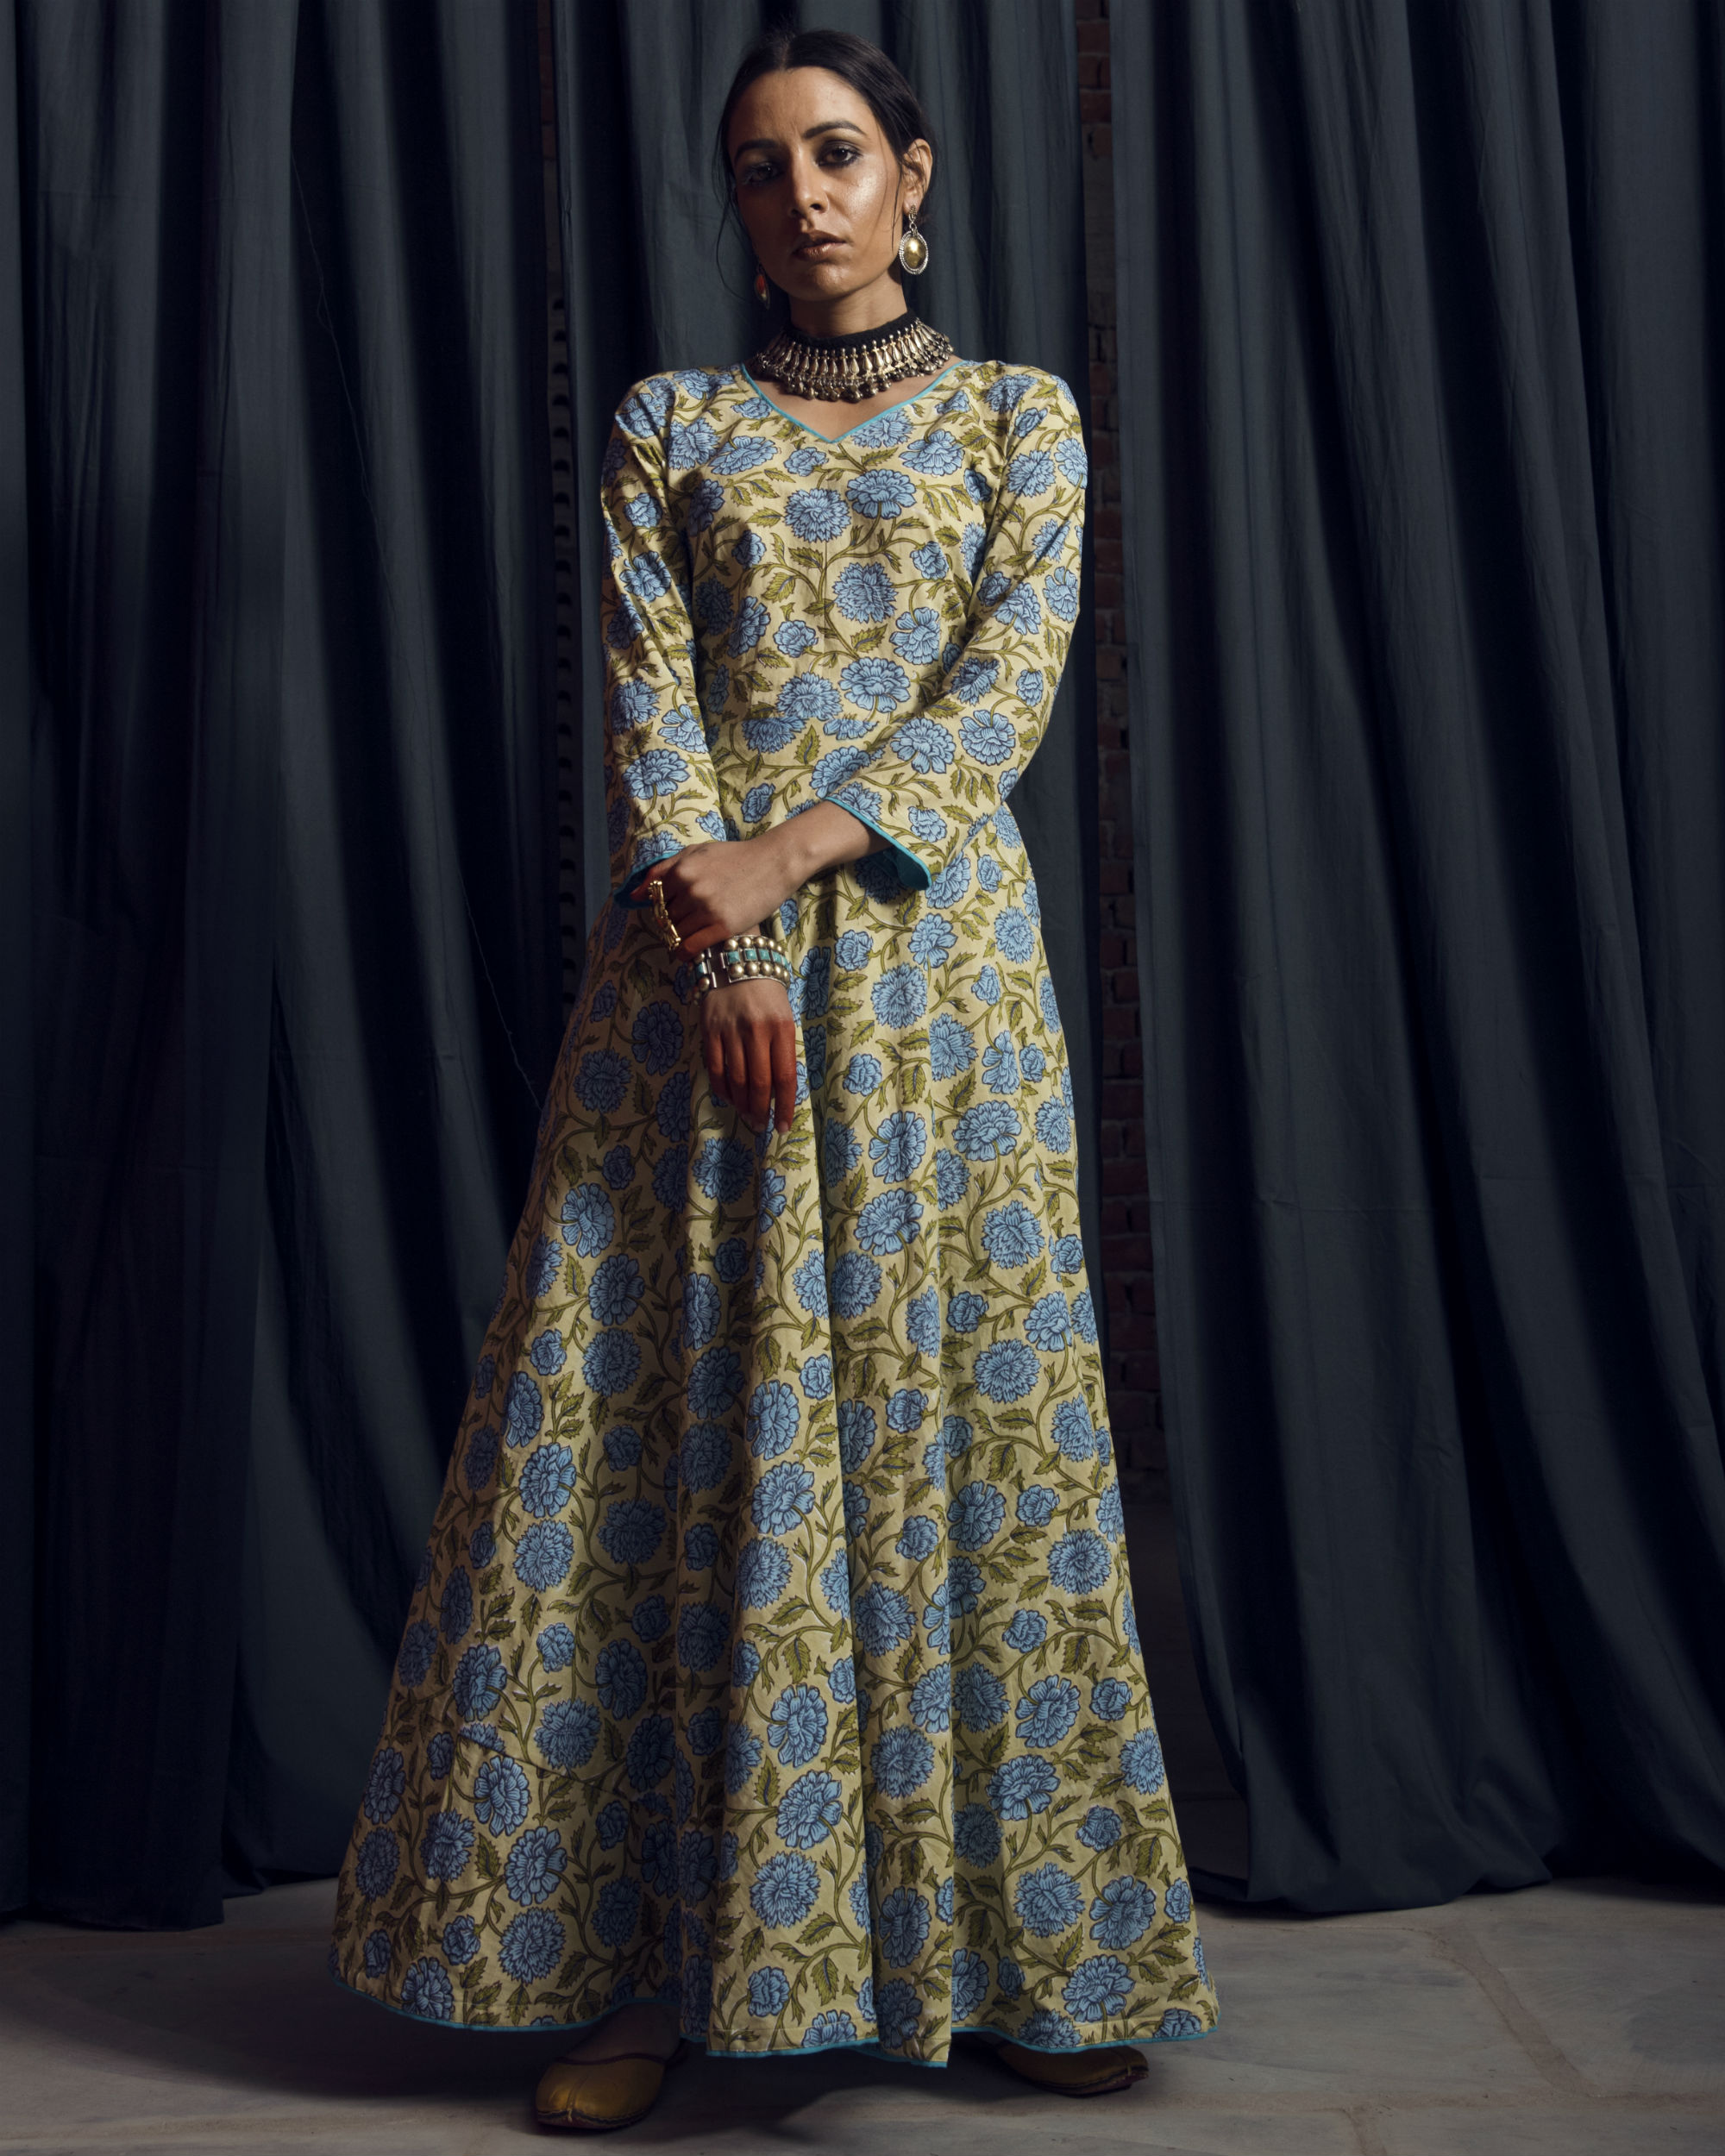 Green and turquoise floral dress by Rivaaj | The Secret Label